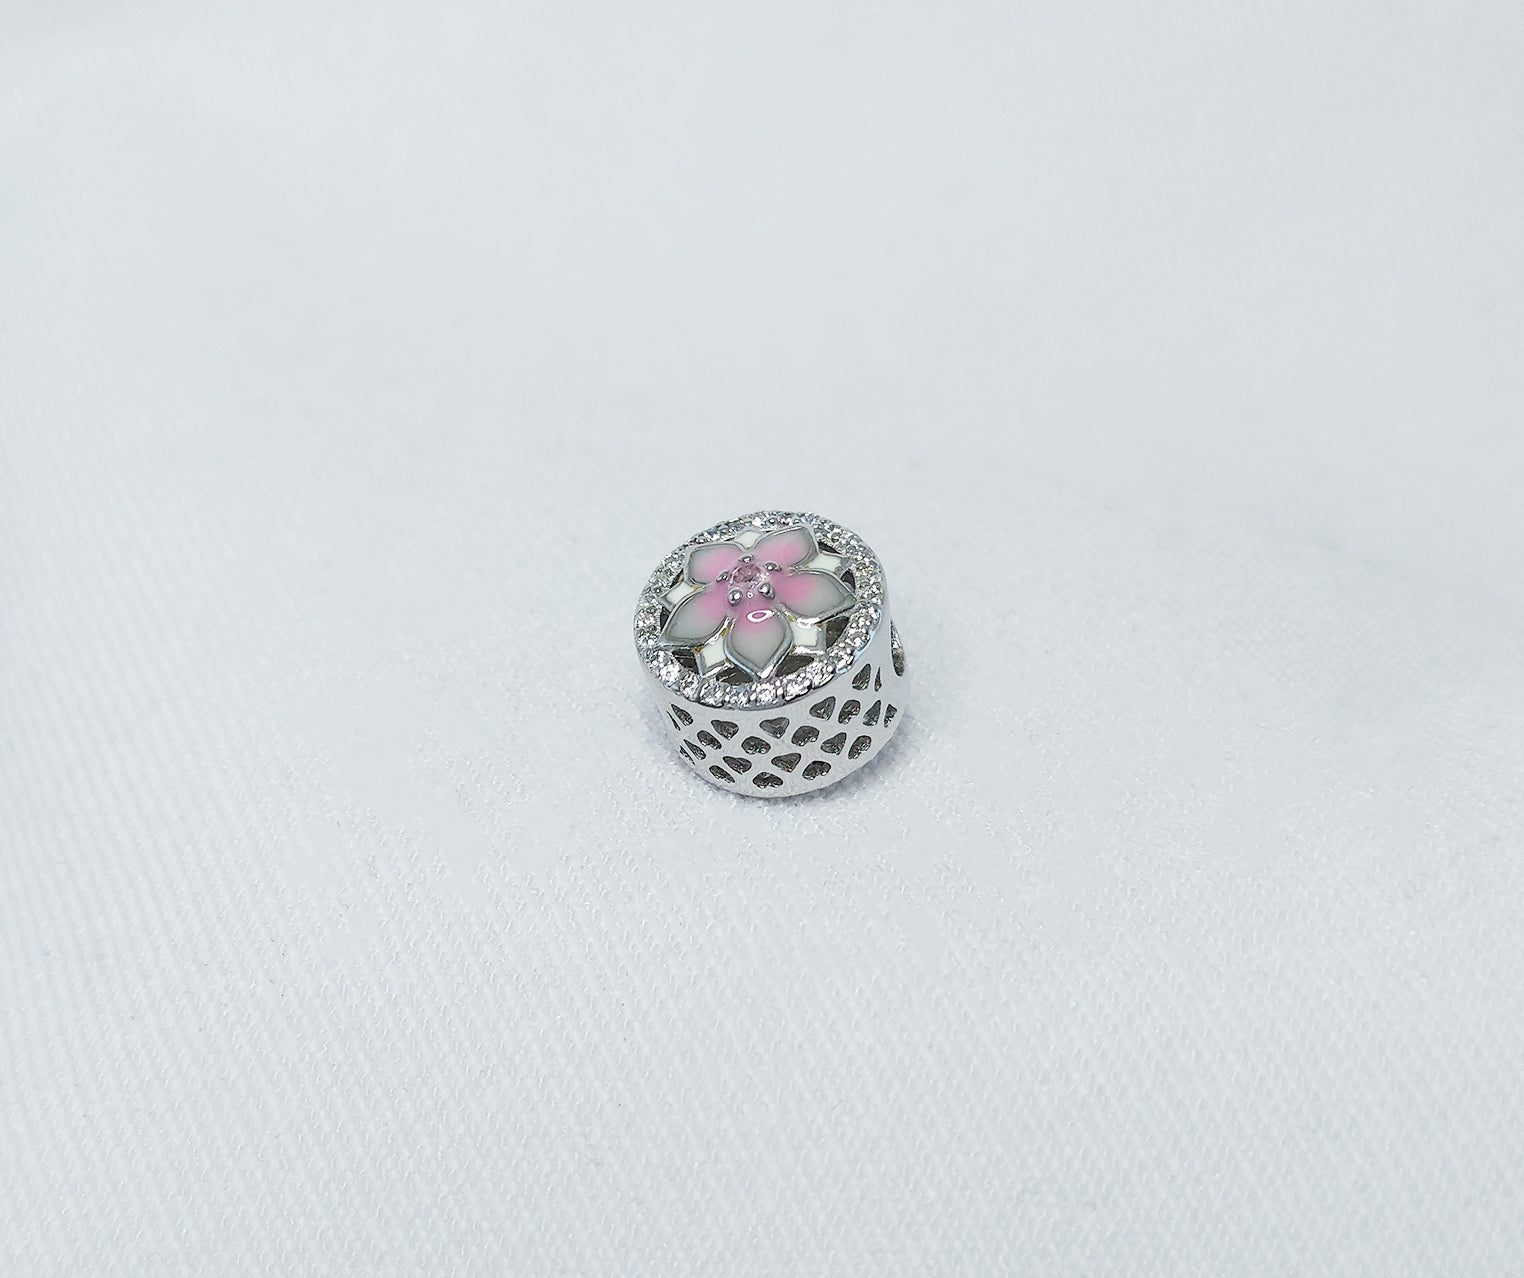 Sterling Silver Charm Bead with Cubic Zirconia Stones